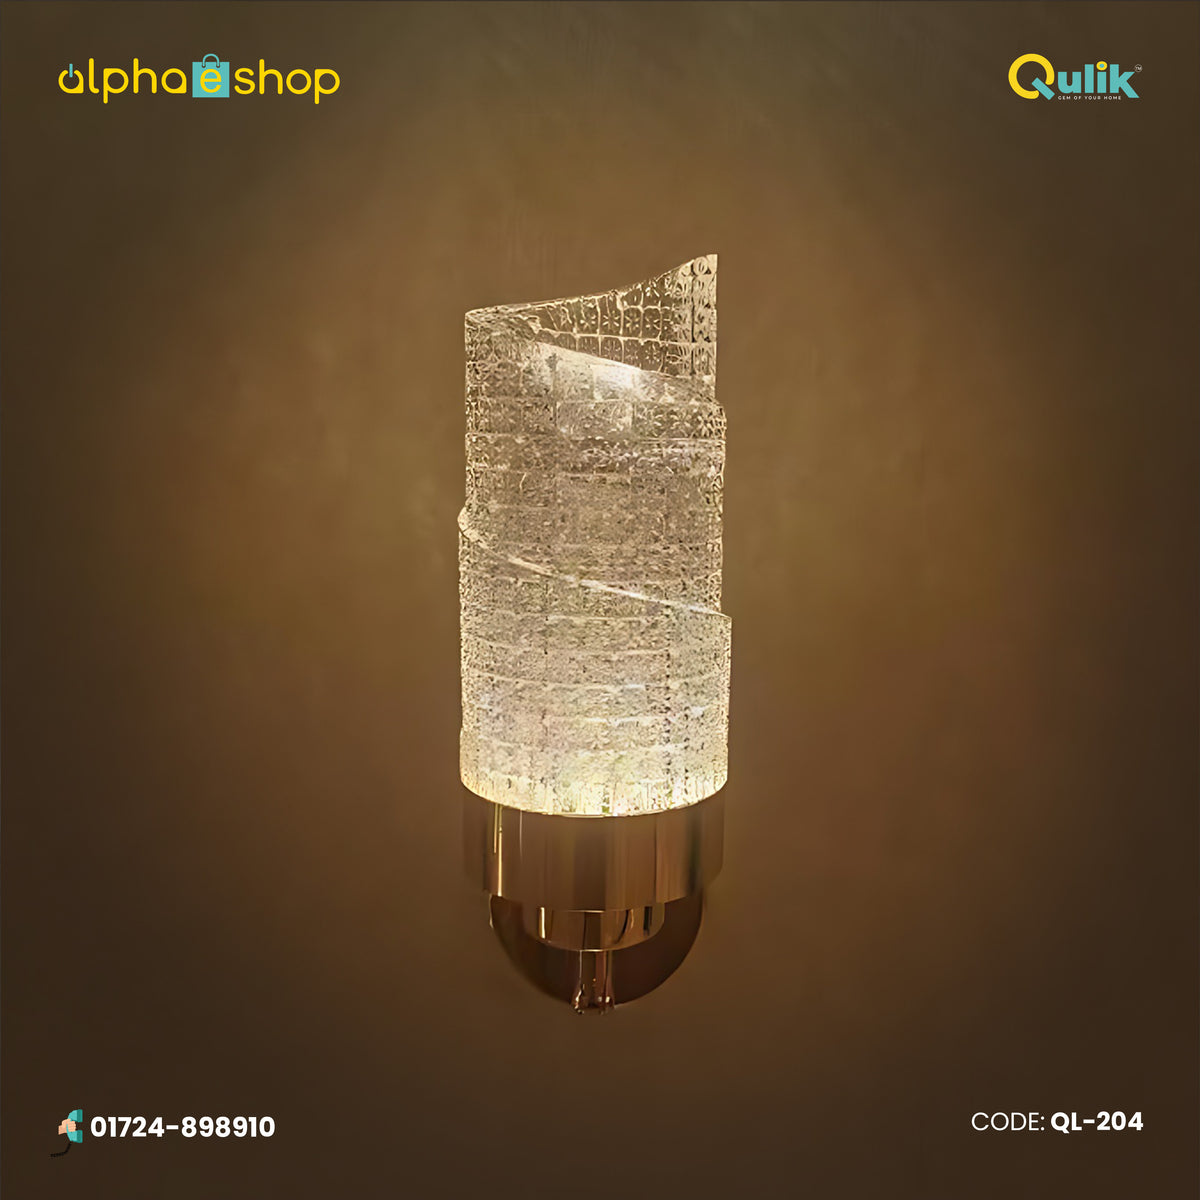 Qulik 204 LED Wall Lamp - Timeless Elegance, 3-Color Adjustable Light, 2-Year Warranty. Elevate your living spaces with this sophisticated single-lamp wall fixture.